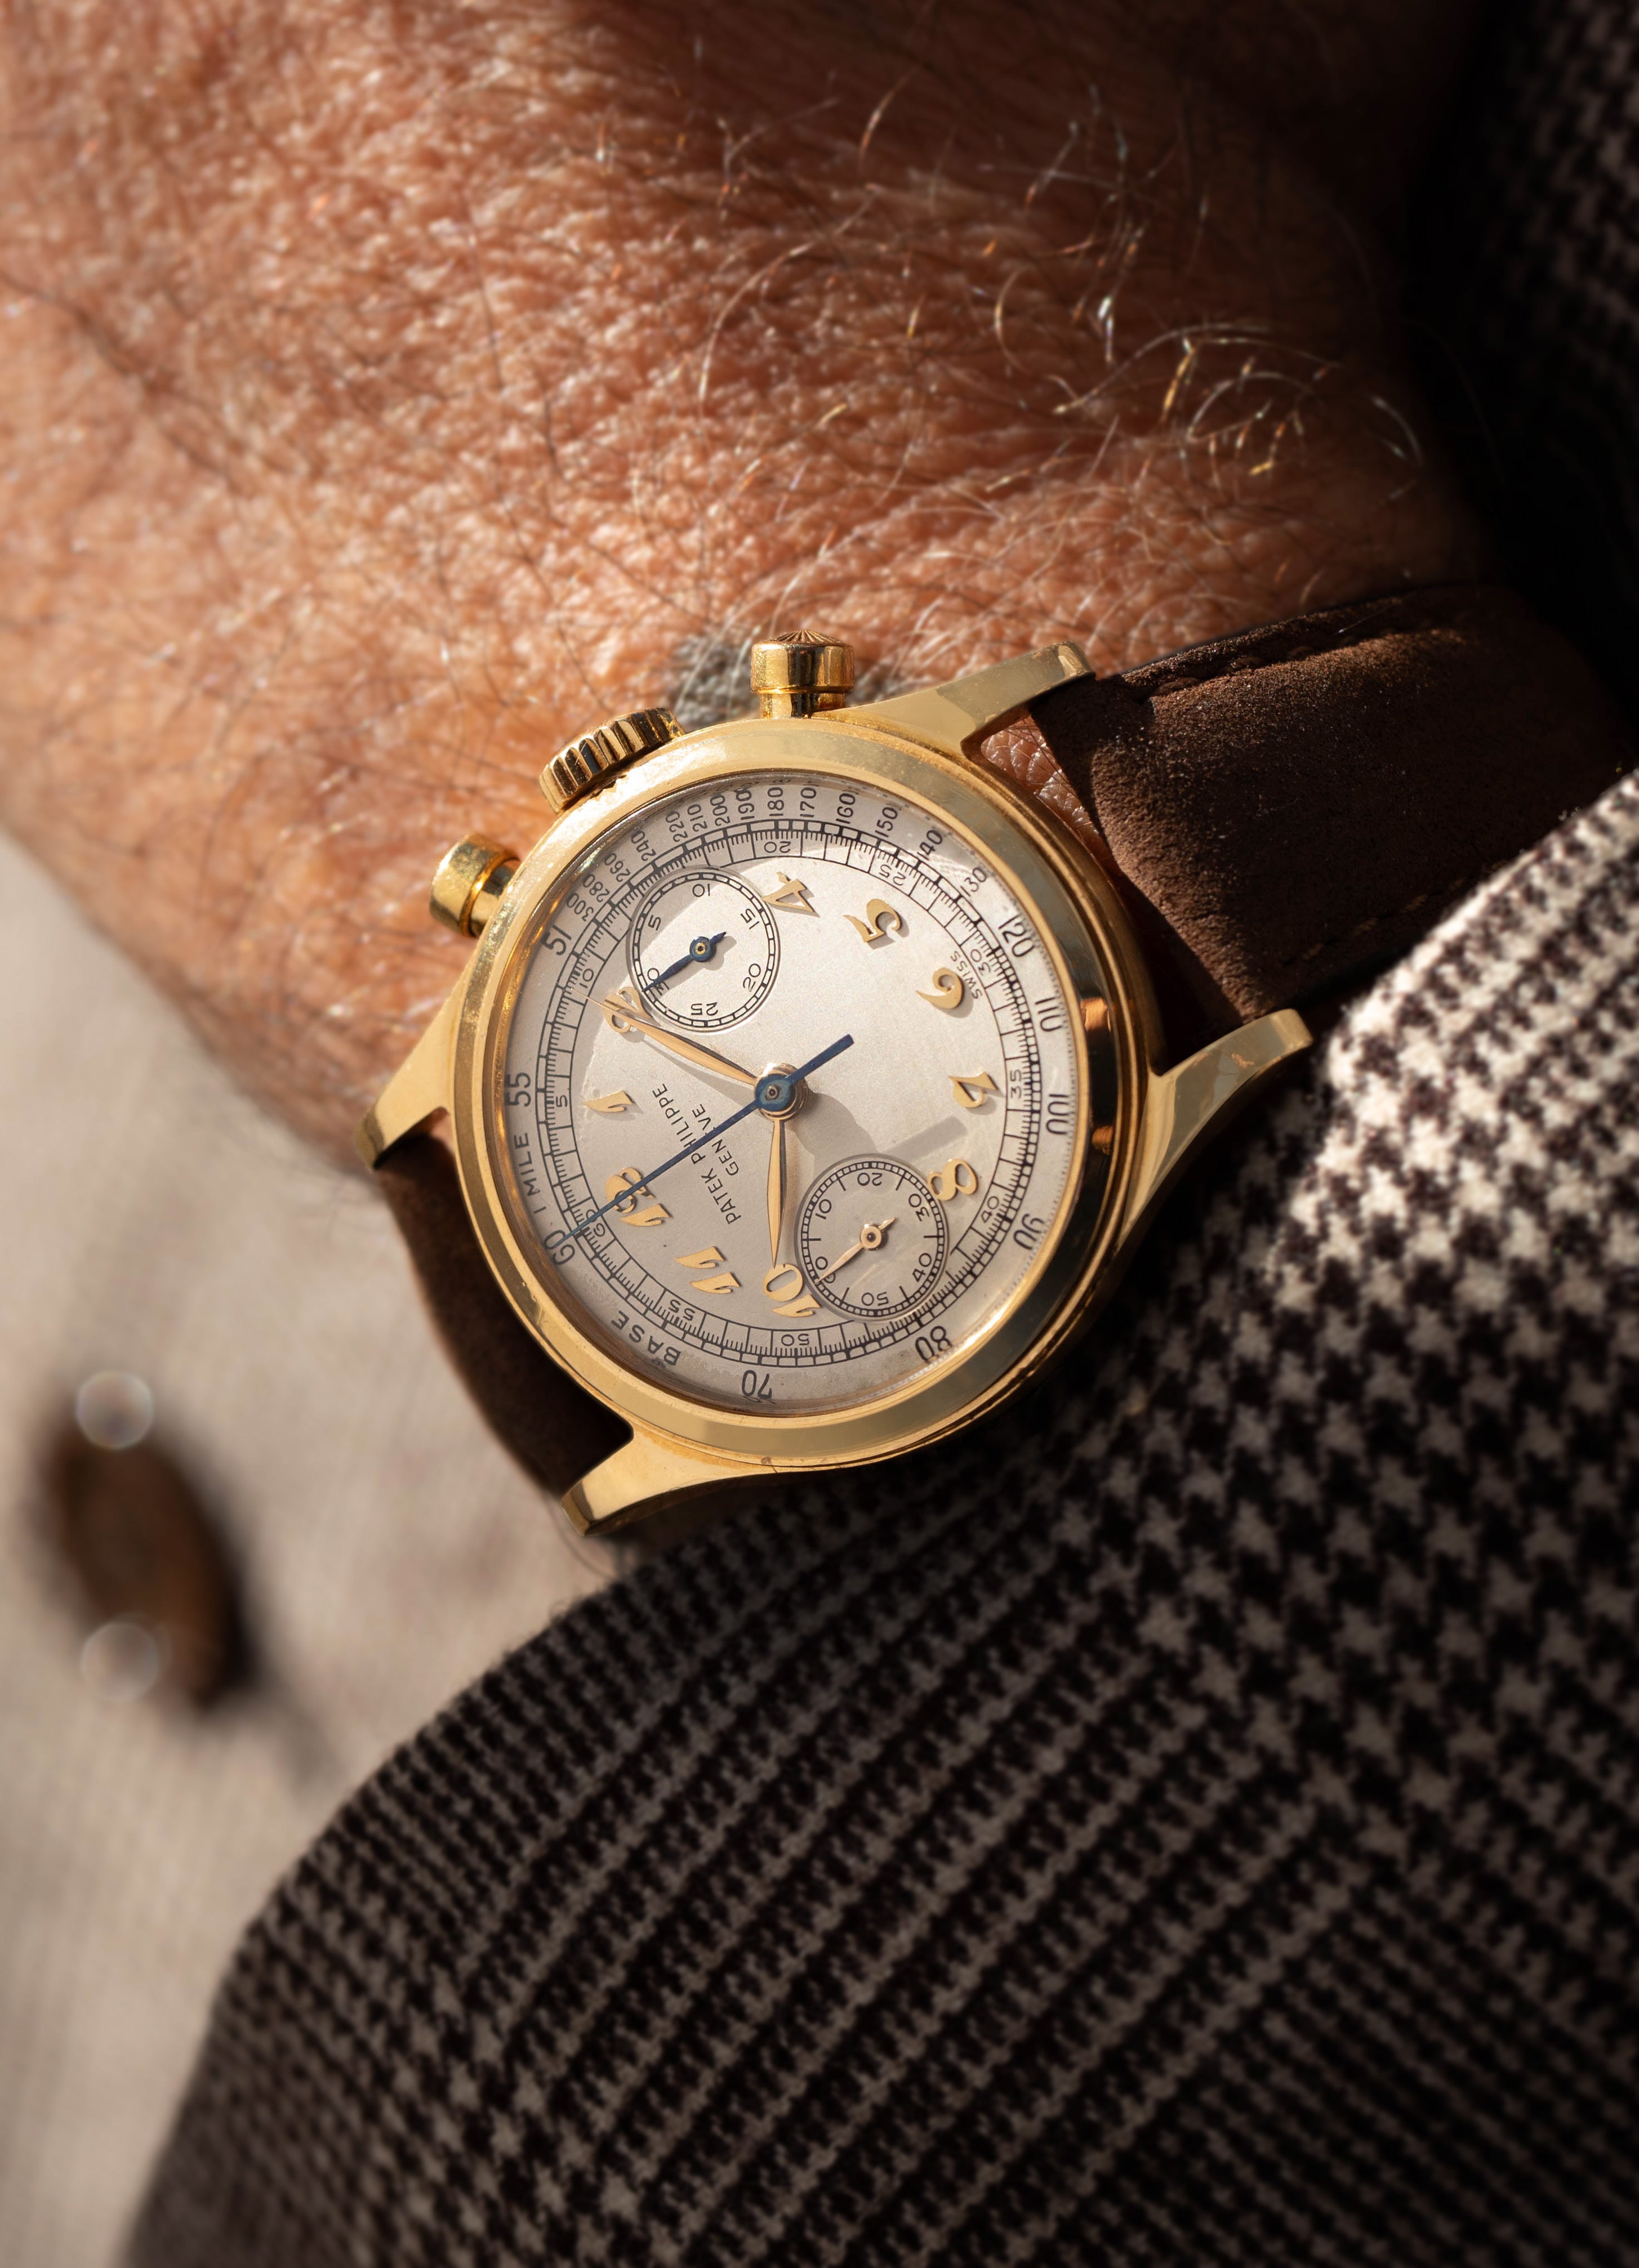 Patek Philippe ref. 1463 in yellow gold breguet numbers watch